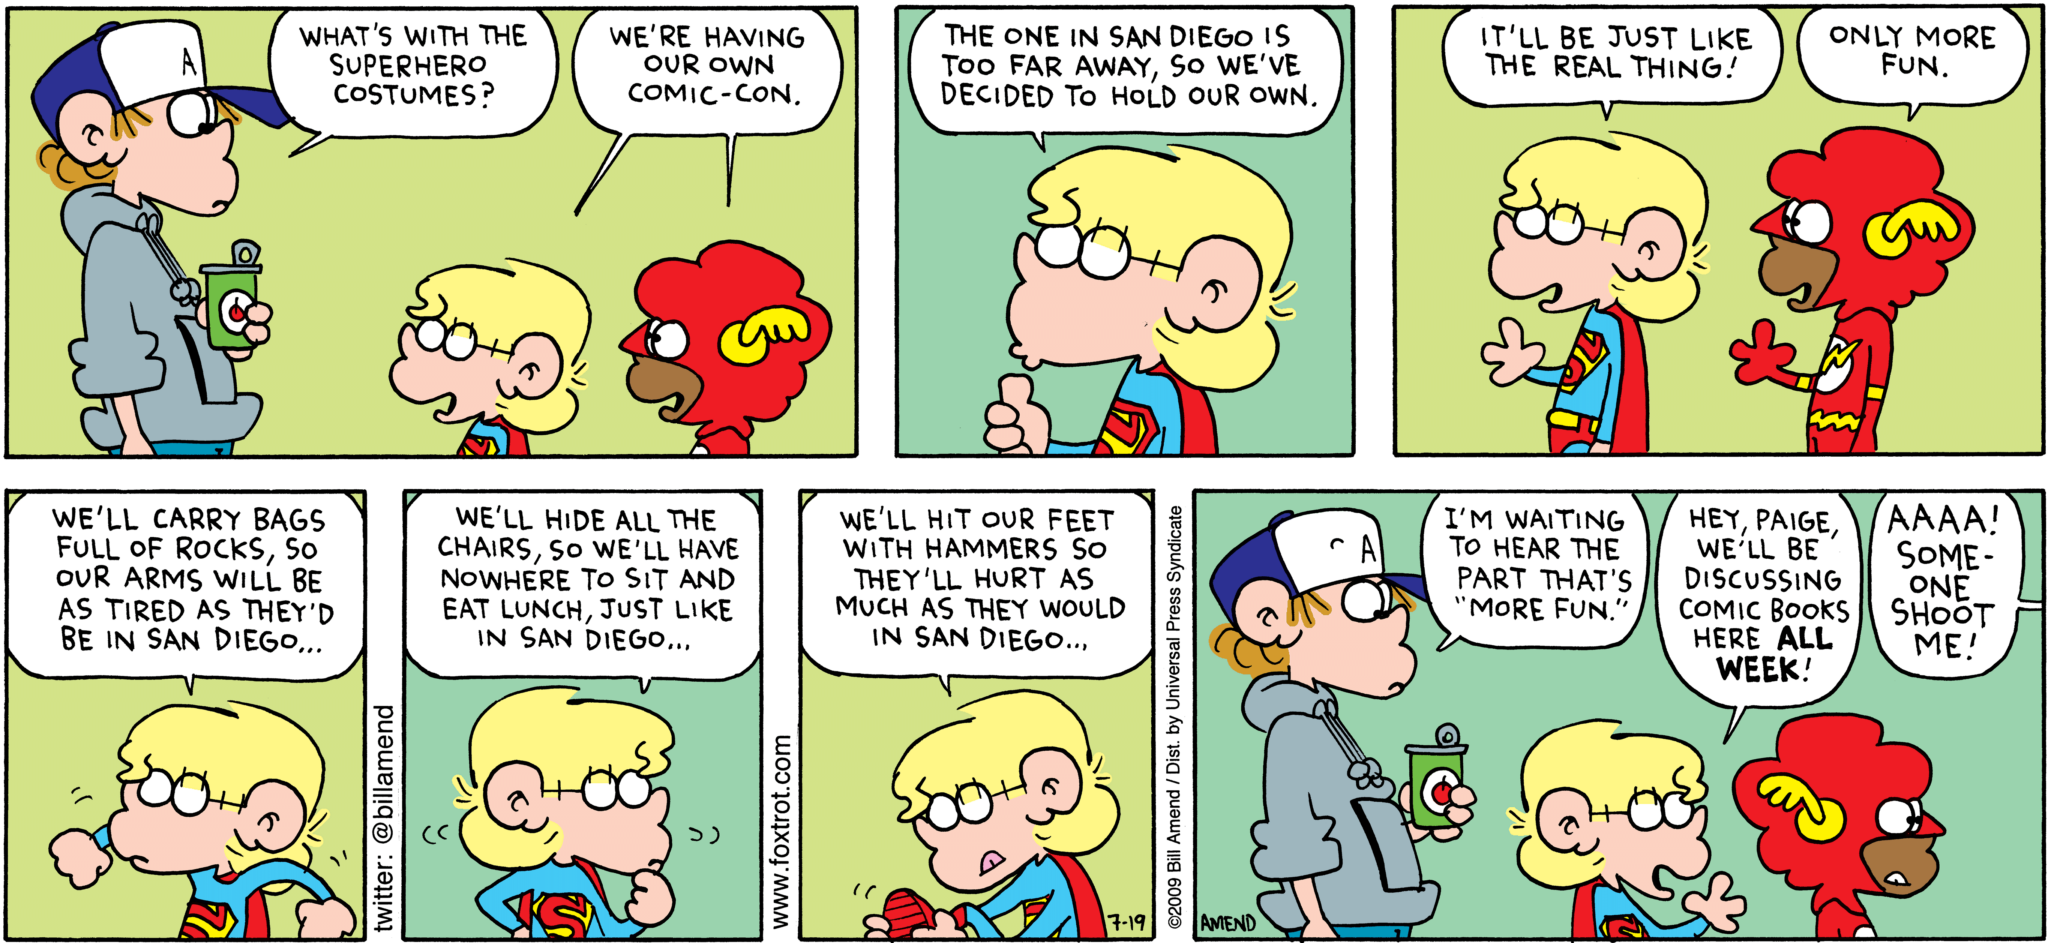 FoxTrot comic strip by Bill Amend - "Comic-Con Fun" published July 19, 2009 - Peter Fox: What's with the superhero costumes? Jason Fox: We're having our own comic-con. The one in San Diego is too far away, so we've decided to hold our own. It'll be just like the real thing! Marcus: Only more fun. Jason Fox: We'll carry bags full of rocks, so our arms will be as tired as they'd be in San Diego. We'll hid all the chairs, so we'll have nowhere to sit and eat lunch, just like in San Diego...We'll hit our feet with hammers so they'll hurt as much as they would in San Diego... Peter Fox: I'm waiting to hear the part that's "more fun". Jason Fox: Hey, Paige, we'll be discussing comic books here ALL WEEK! Paige Fox: AAAA! SOMEONE SHOOT ME!